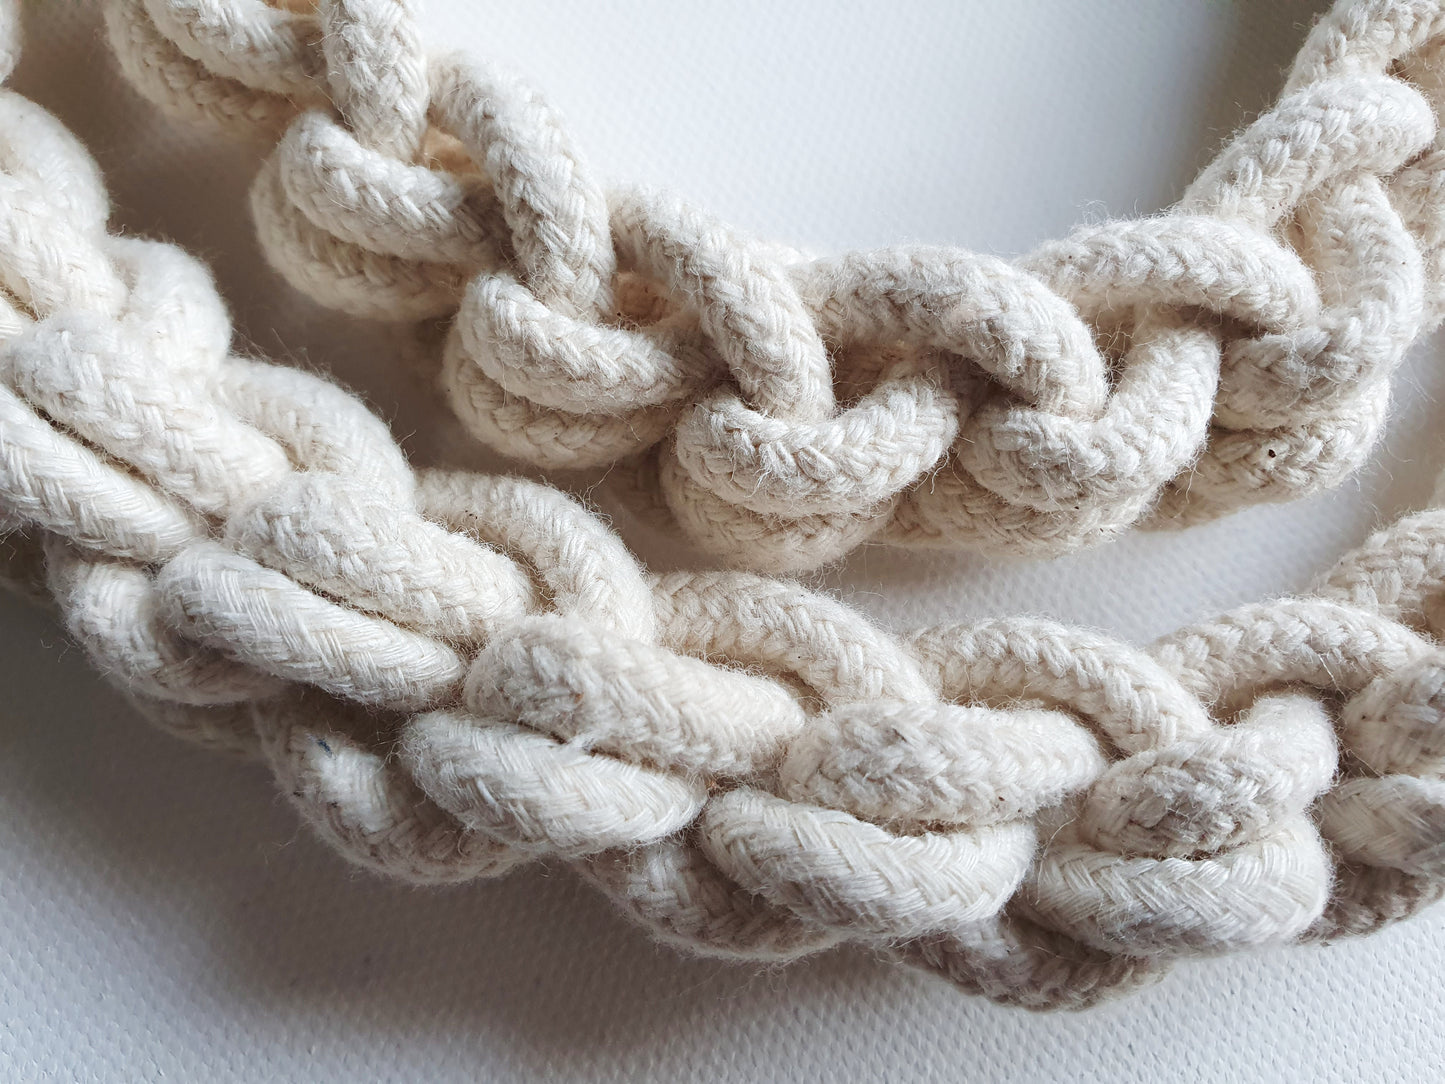 Chunky natural cotton rope necklace VAL